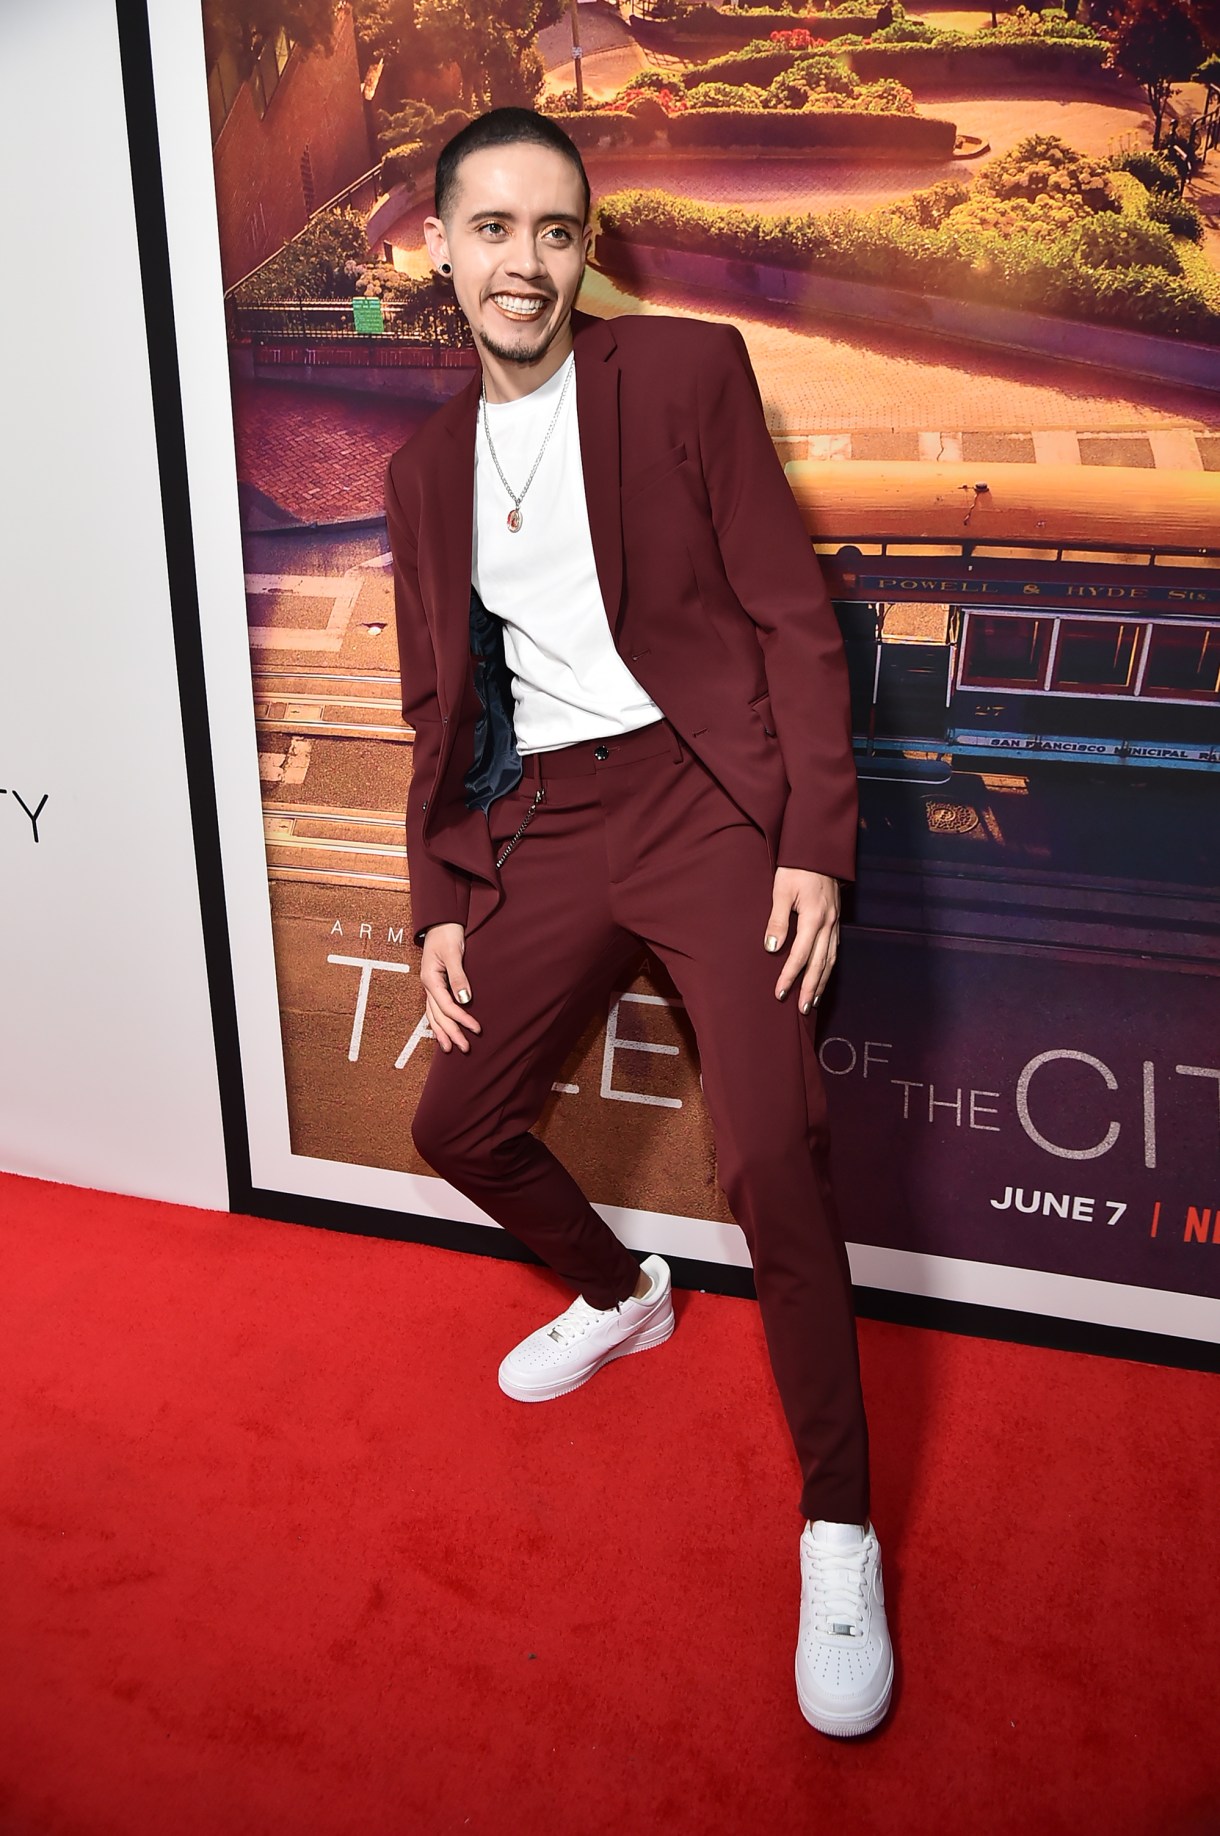 NEW YORK, NEW YORK - JUNE 03: Garcia attends "Tales Of The City" New York Premiere at The Metrograph on June 03, 2019 in New York City. (Photo by Theo Wargo/Getty Images)